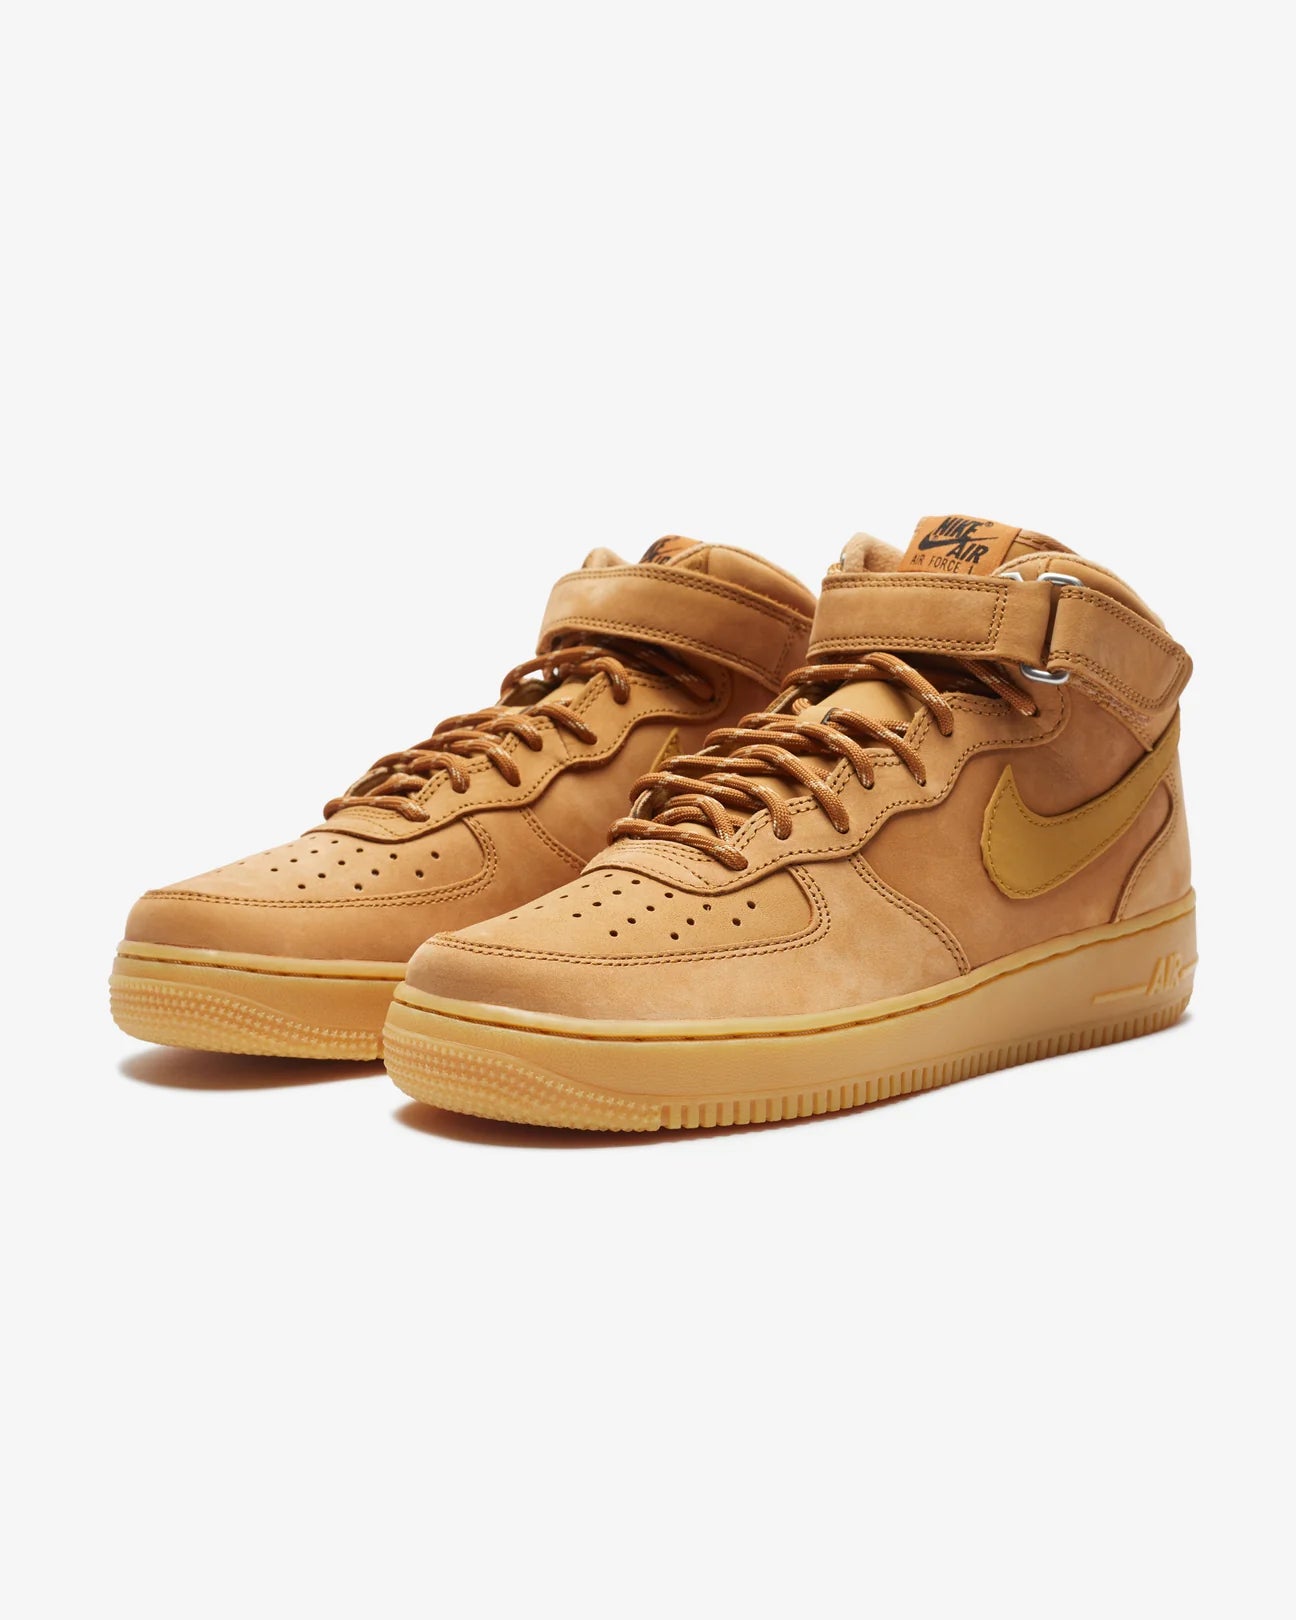 NIKE AIR FORCE 1 MID '07 WB – UNDEFEATED JAPAN